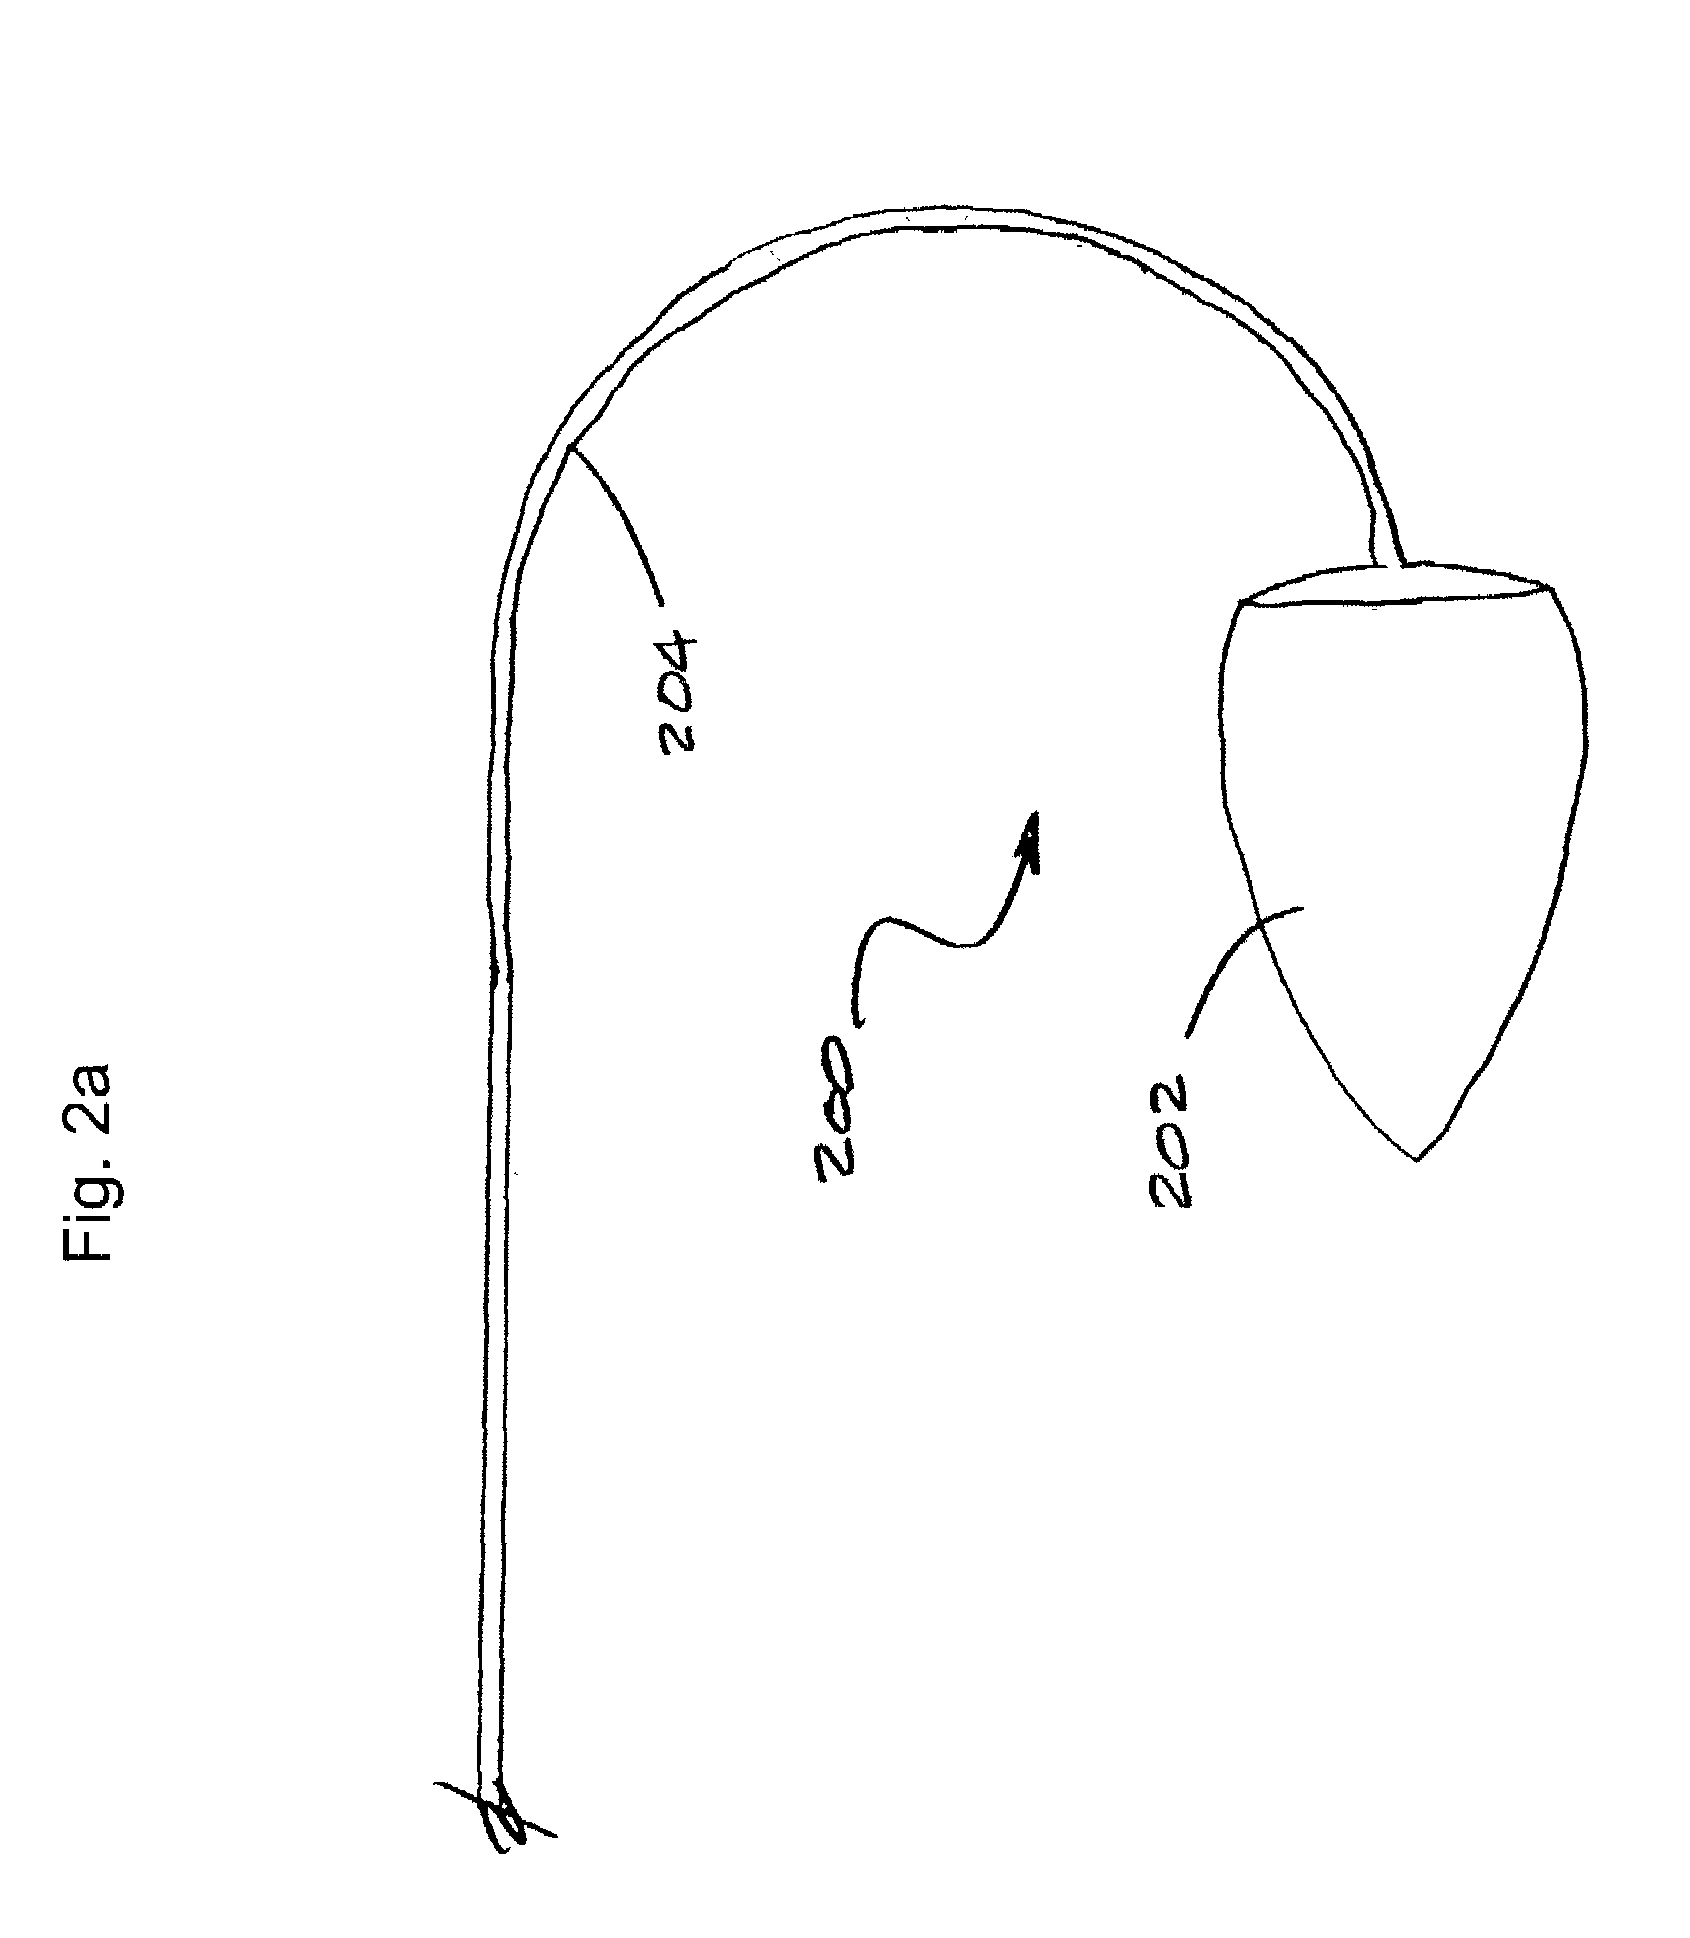 Method and device for percutaneous surgical ventricular repair